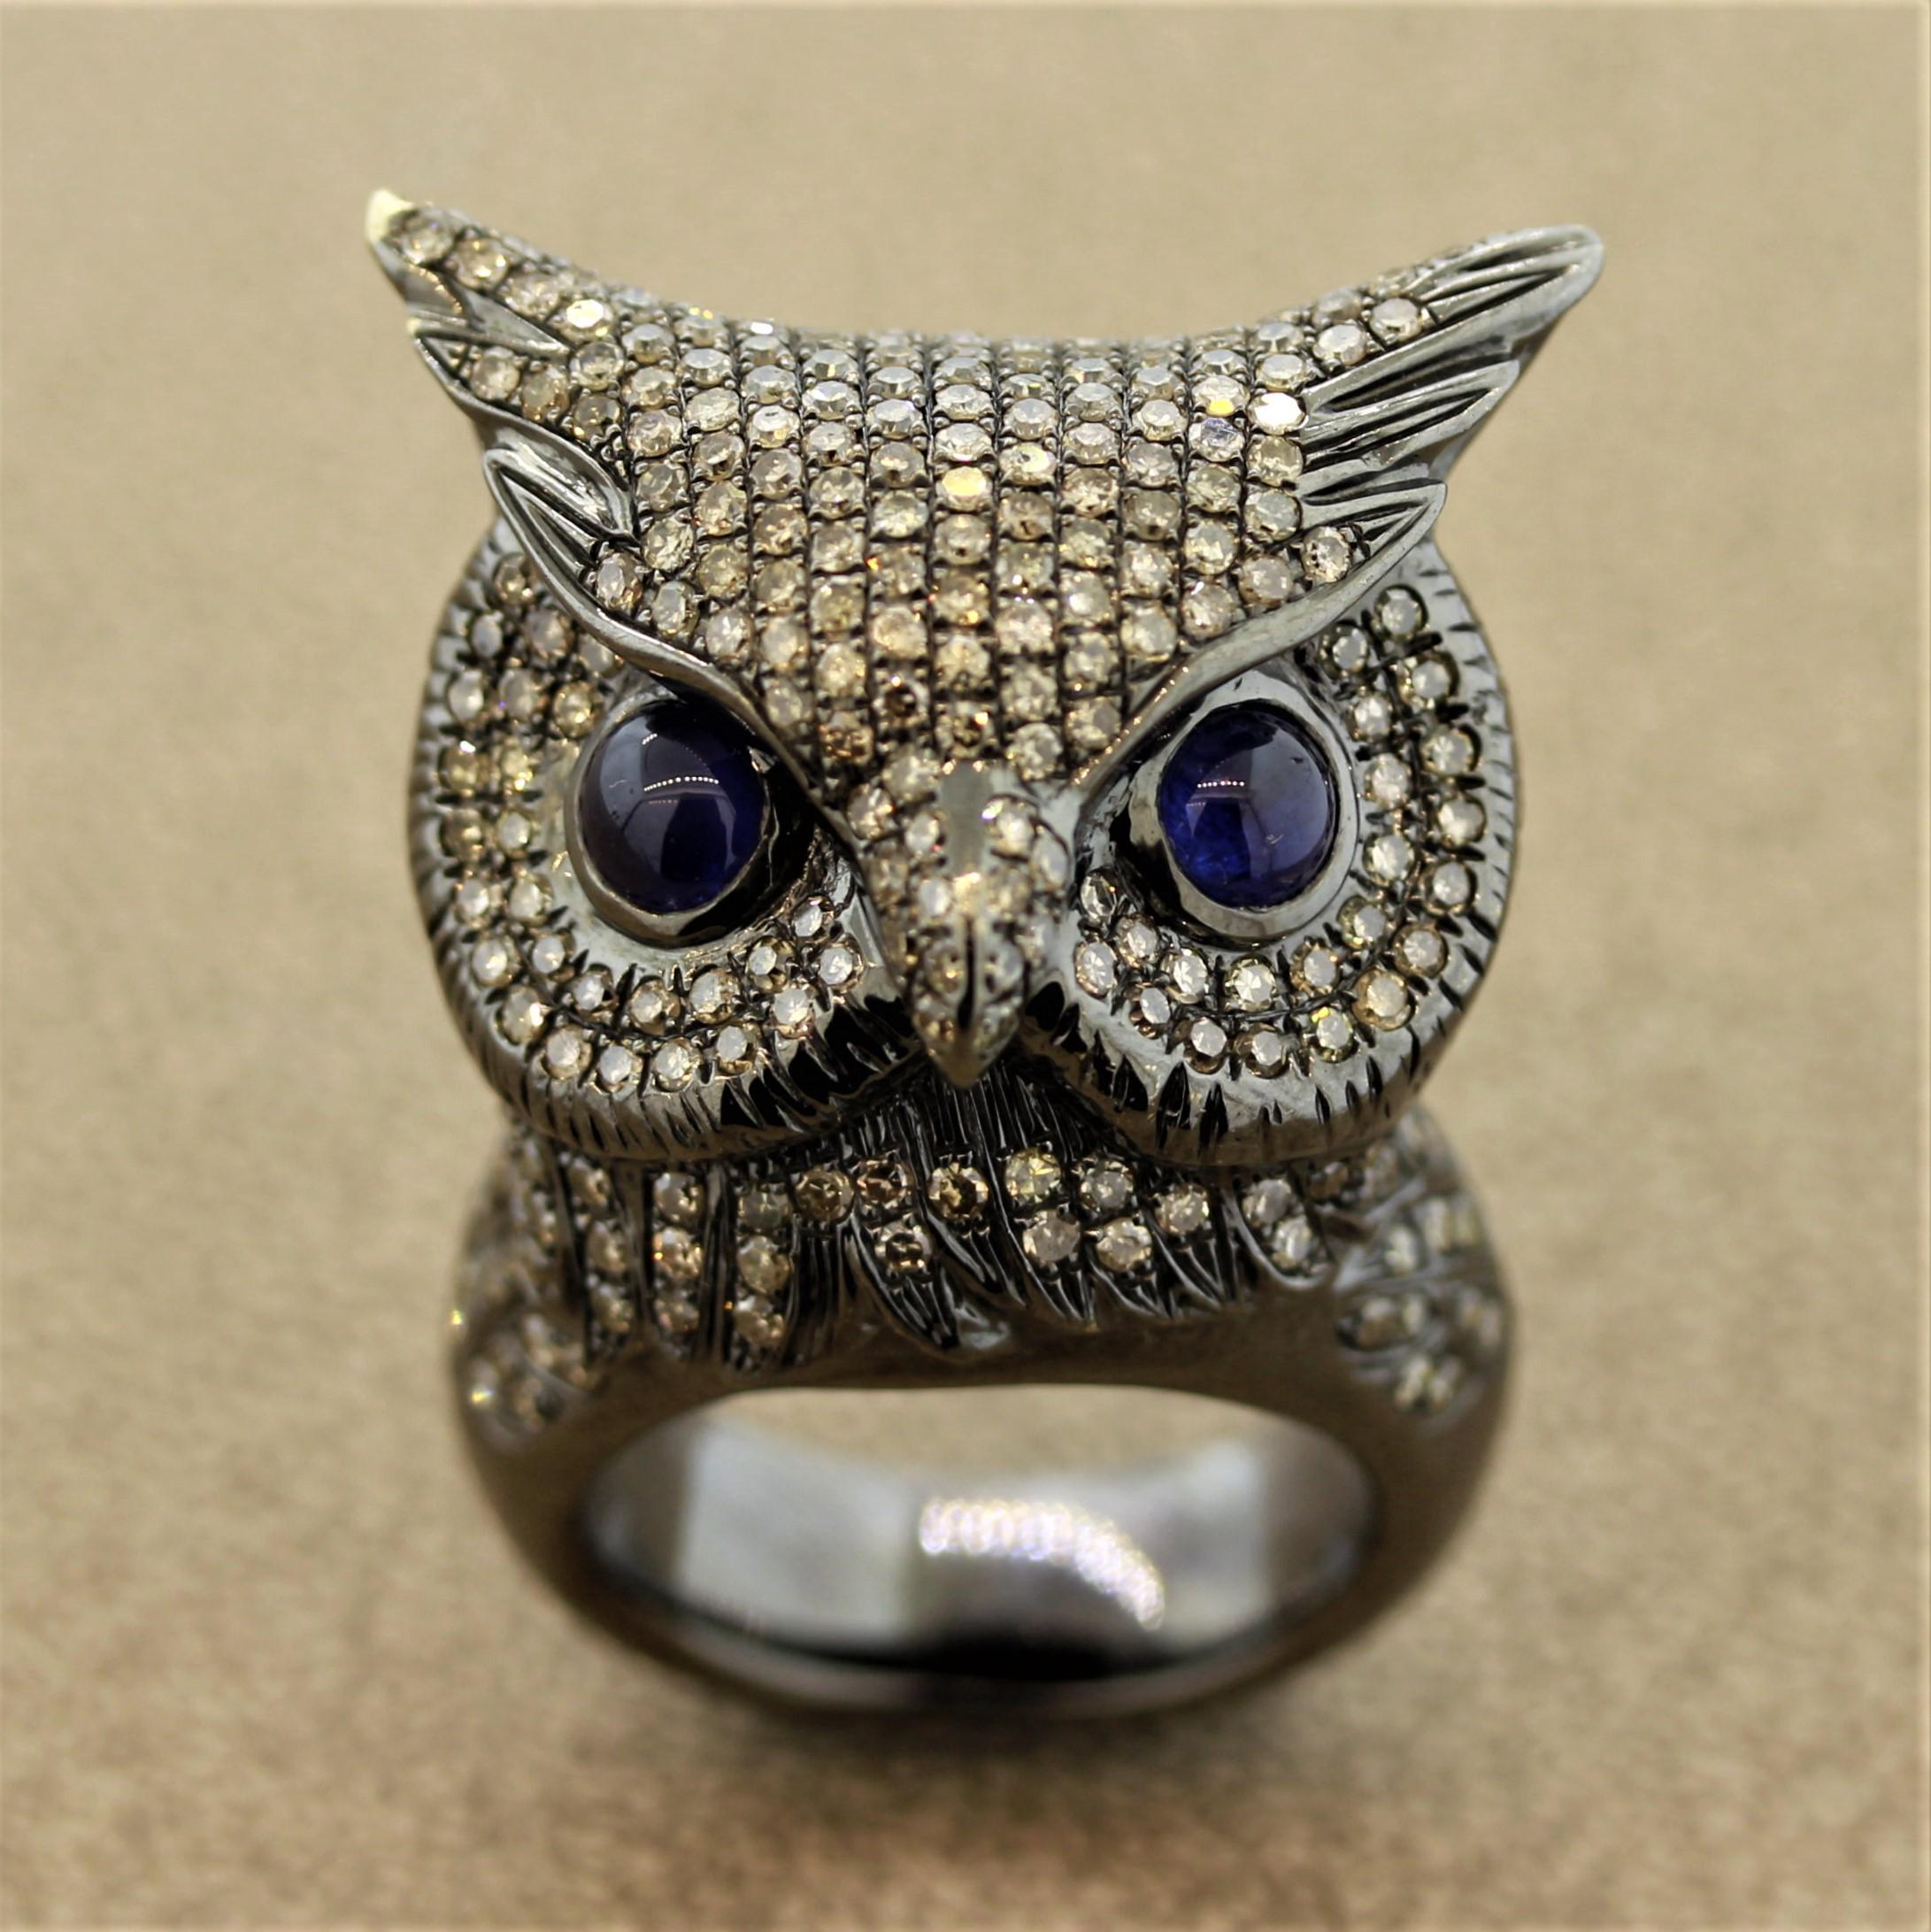 A superbly crafted ring of an owl. It features 3.64 carats of natural round cut diamonds along with 2 cabochon sapphires used as the owl’s eyes. Made in 18k gold with a black rhodium finish giving the piece a chic metallic look.

Ring Size 7